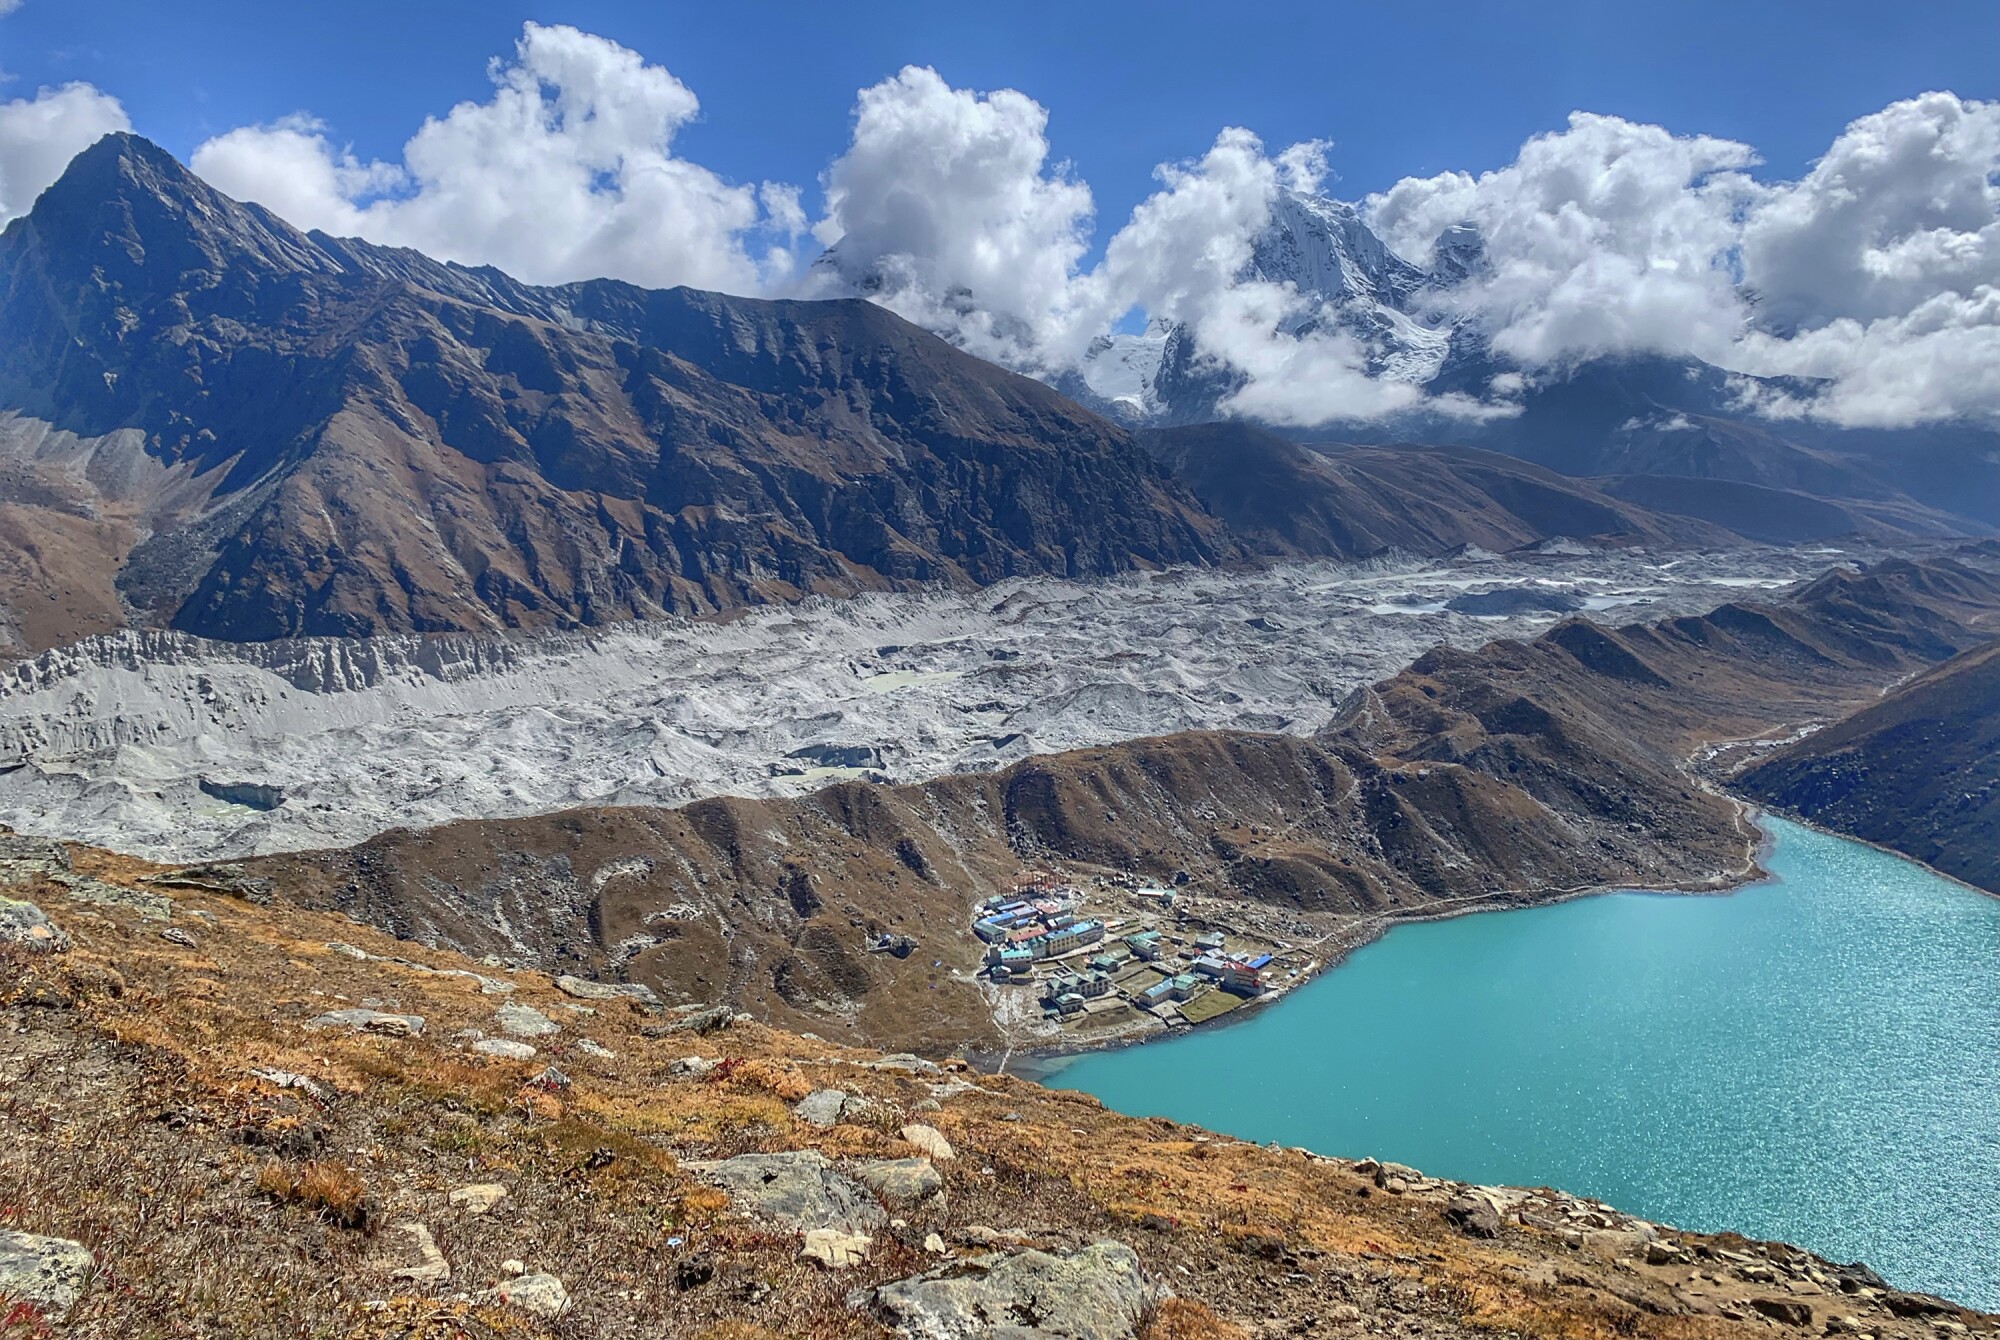 A view of a town on the edge of pristine lakes by a massive glacier (center). 